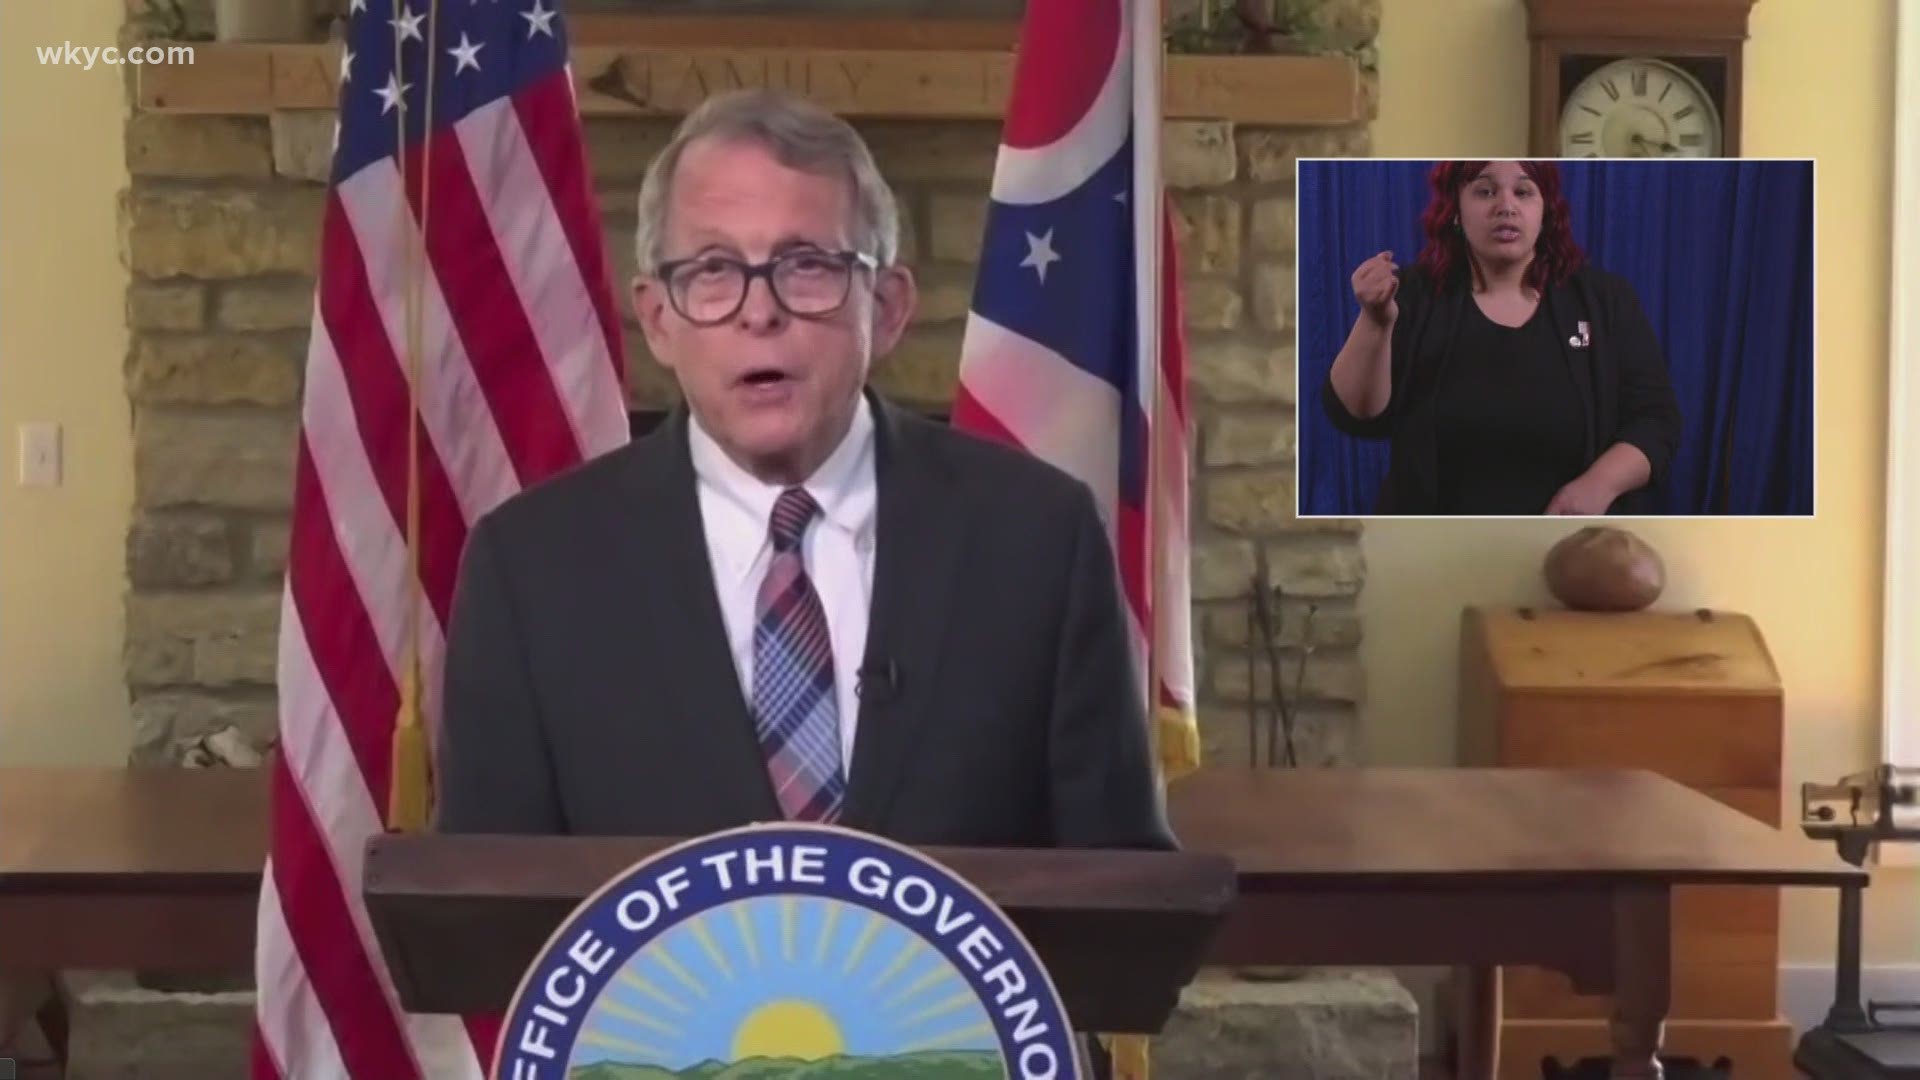 DeWine stated that no decision has been made at this point. The Wolstein Center is currently in the second week of providing second Pfizer vaccinations.